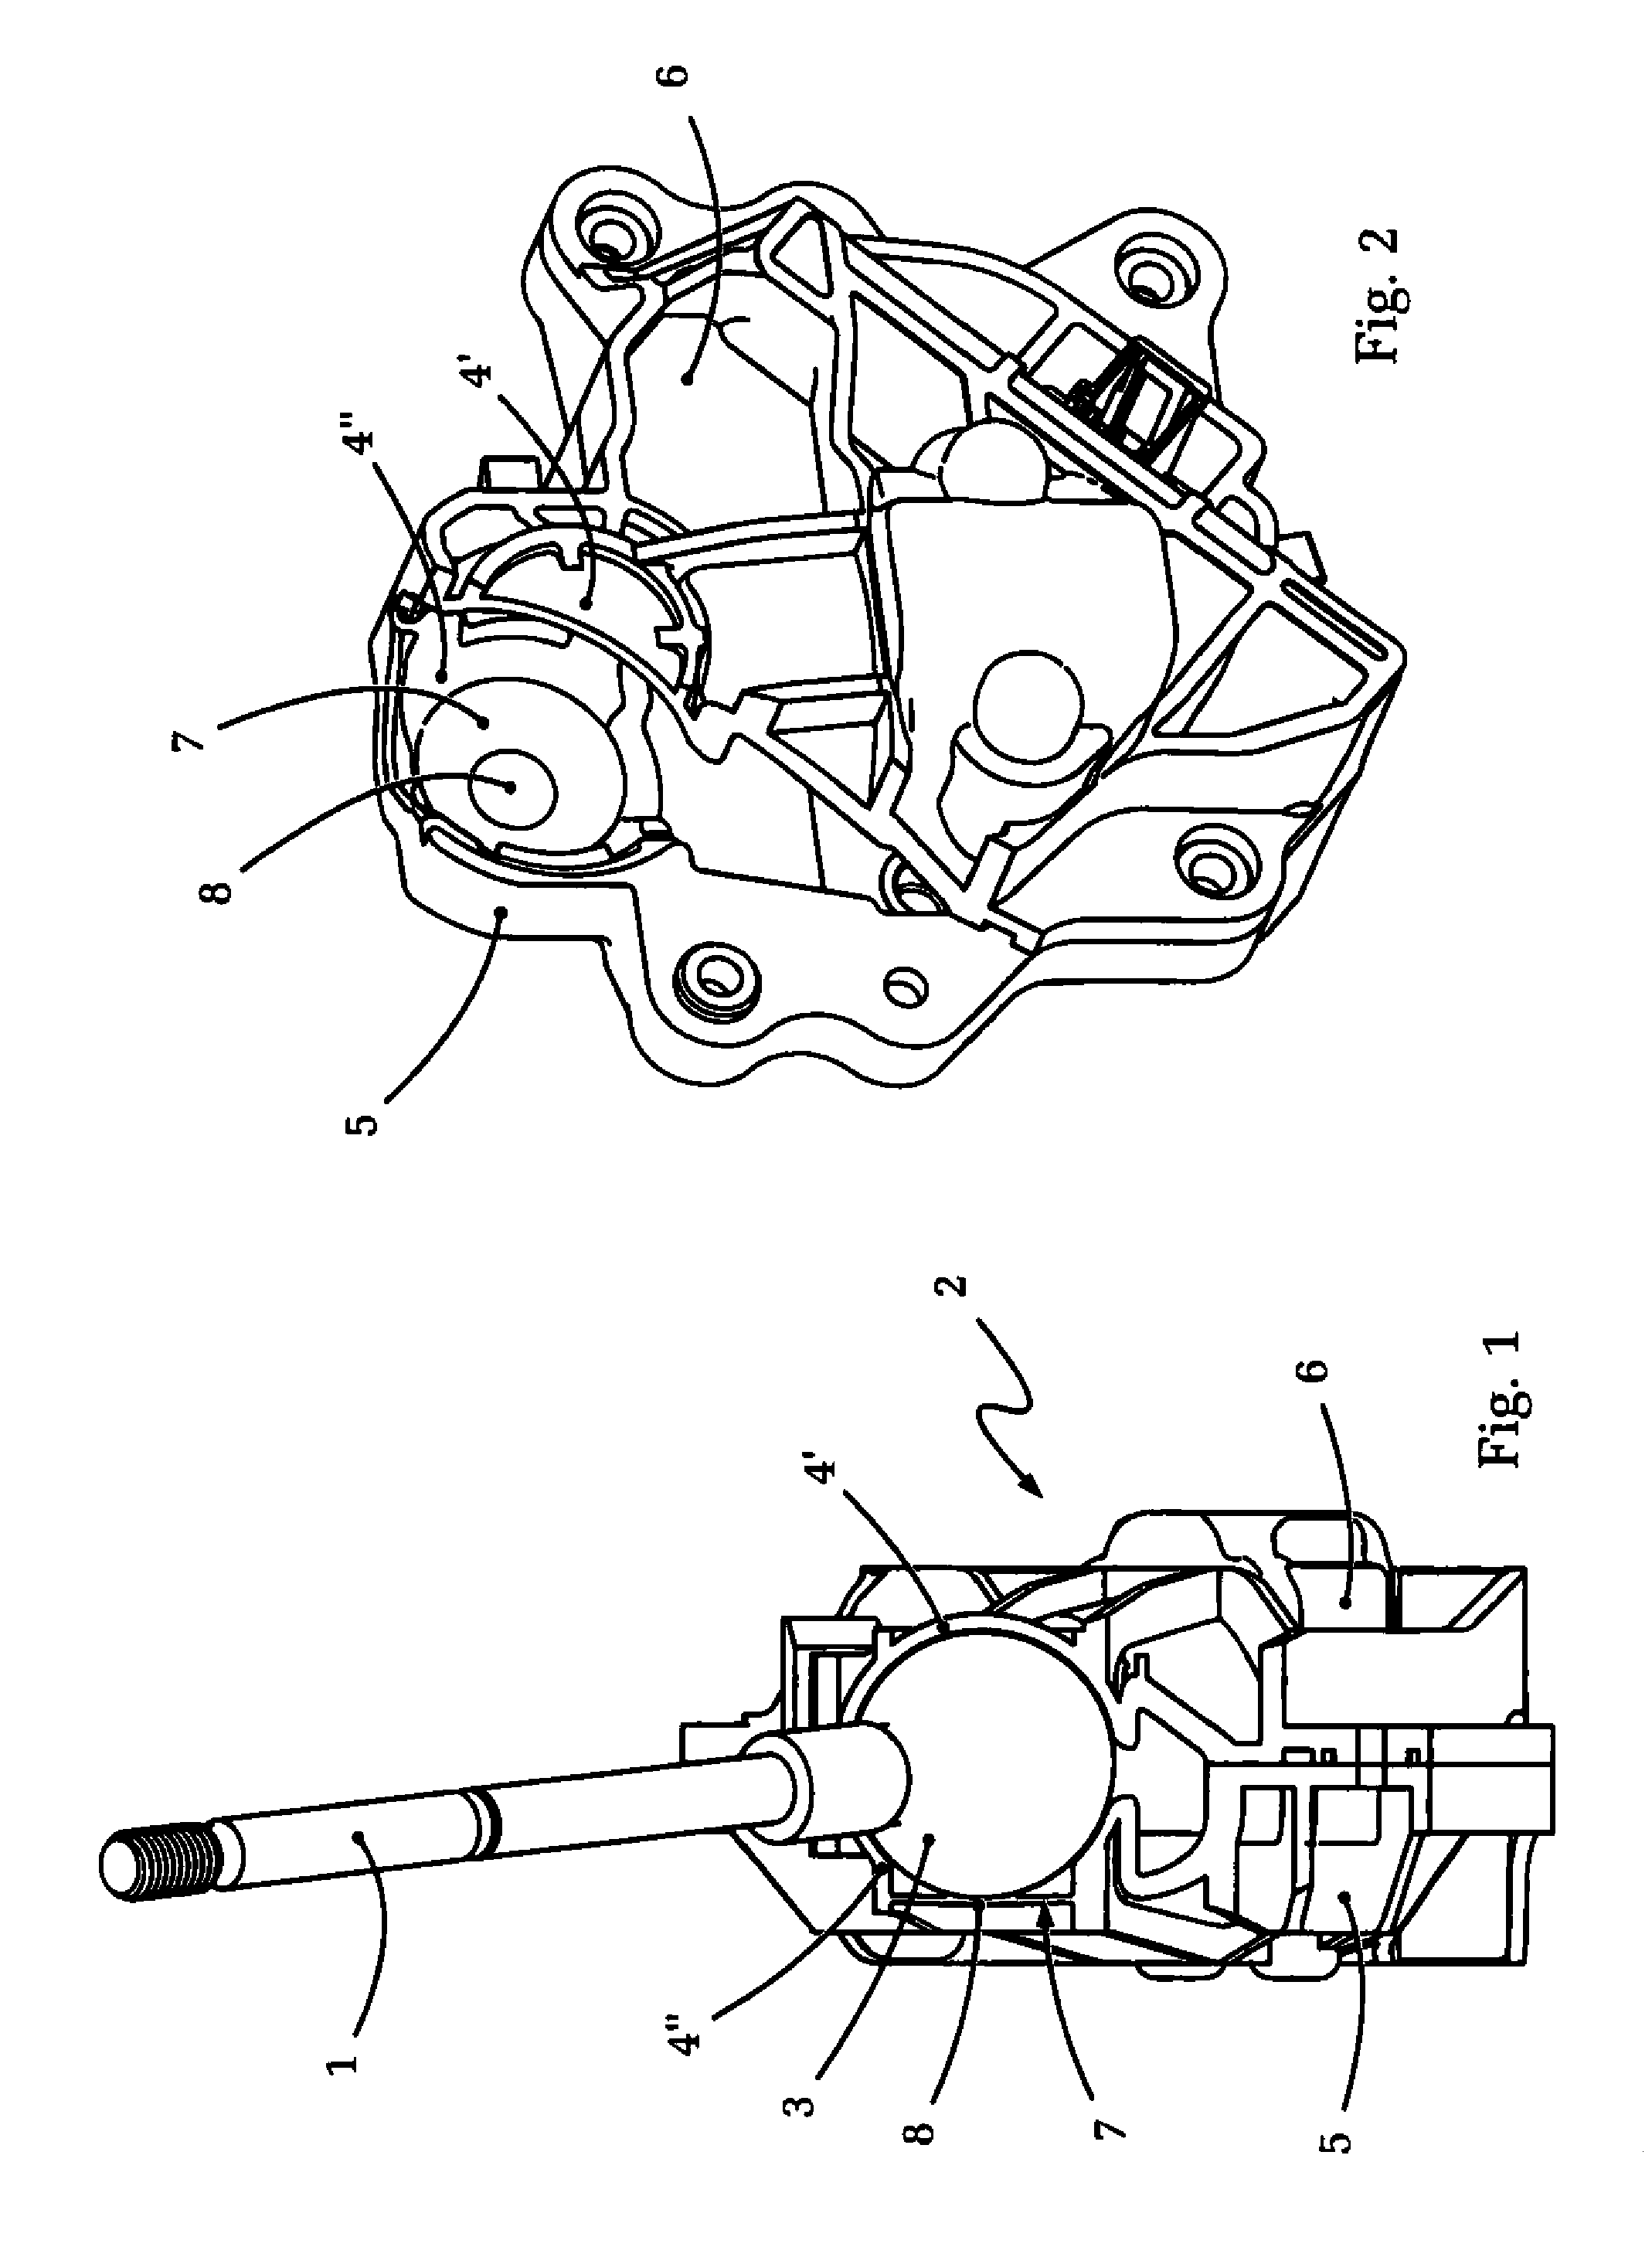 Actuating device